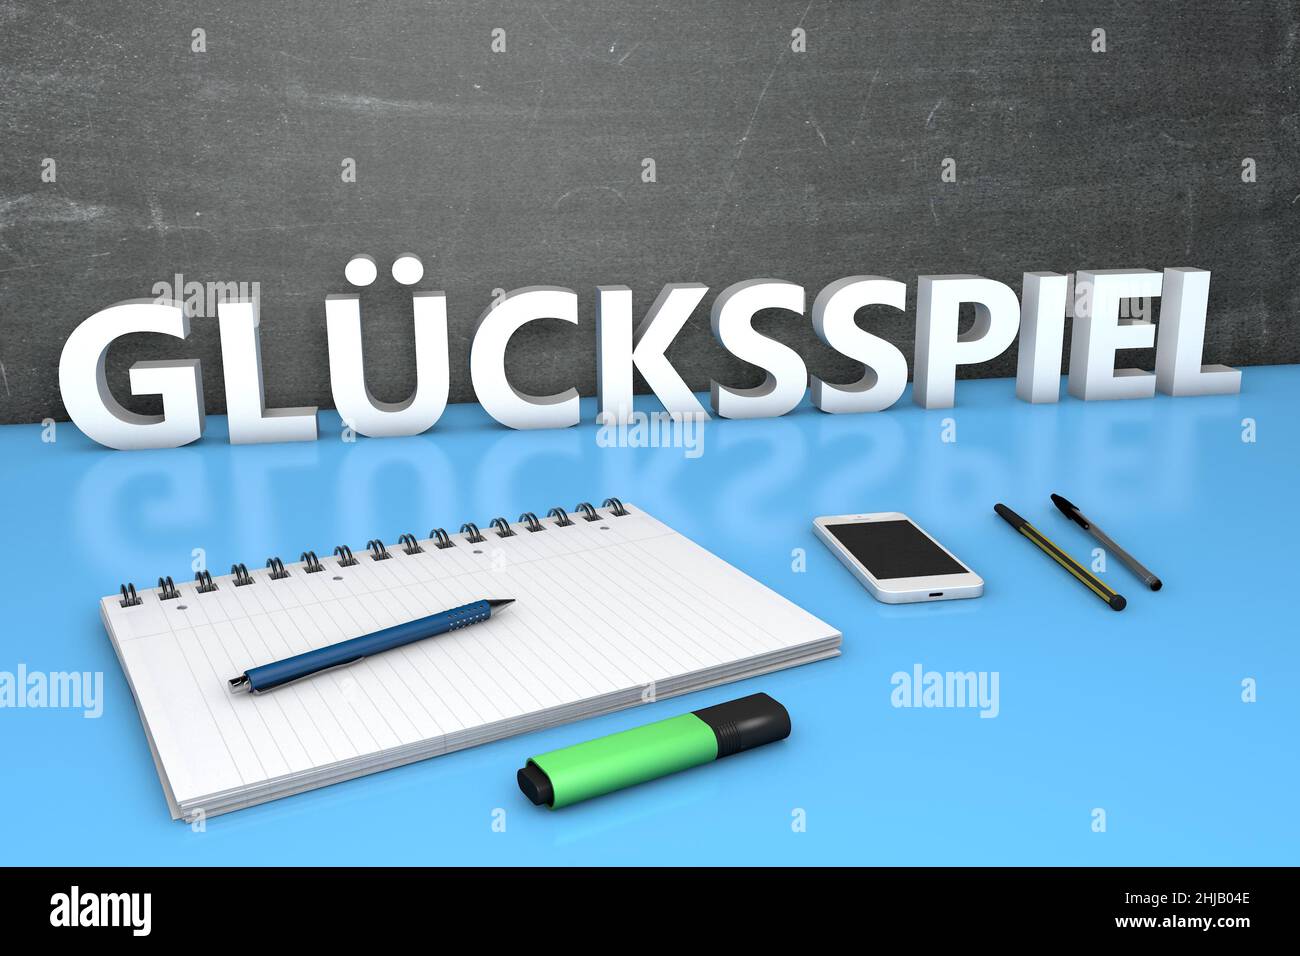 Gluecksspiel - german word for gambling or game of chance - text concept with chalkboard, notebook, pens and mobile phone. 3D render illustration. Stock Photo